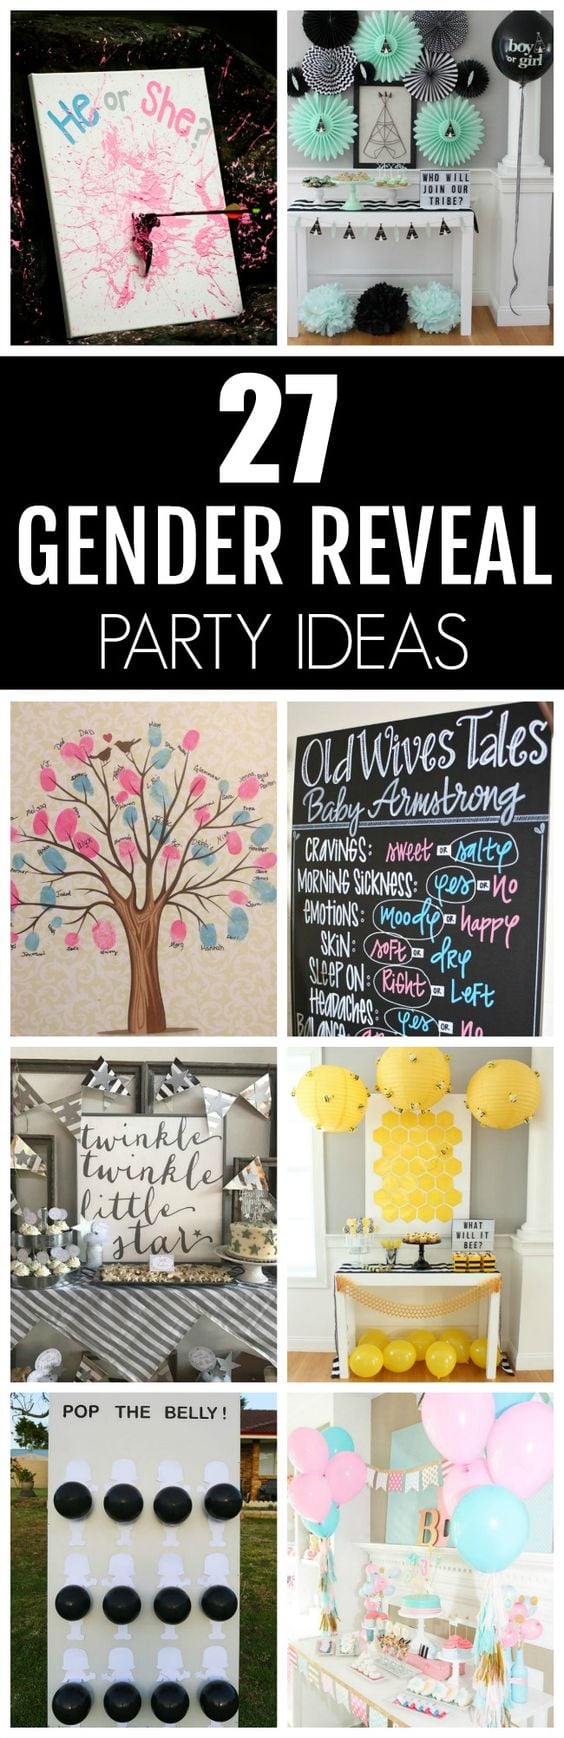 27 Creative Gender Reveal Party Ideas - Pretty My Party